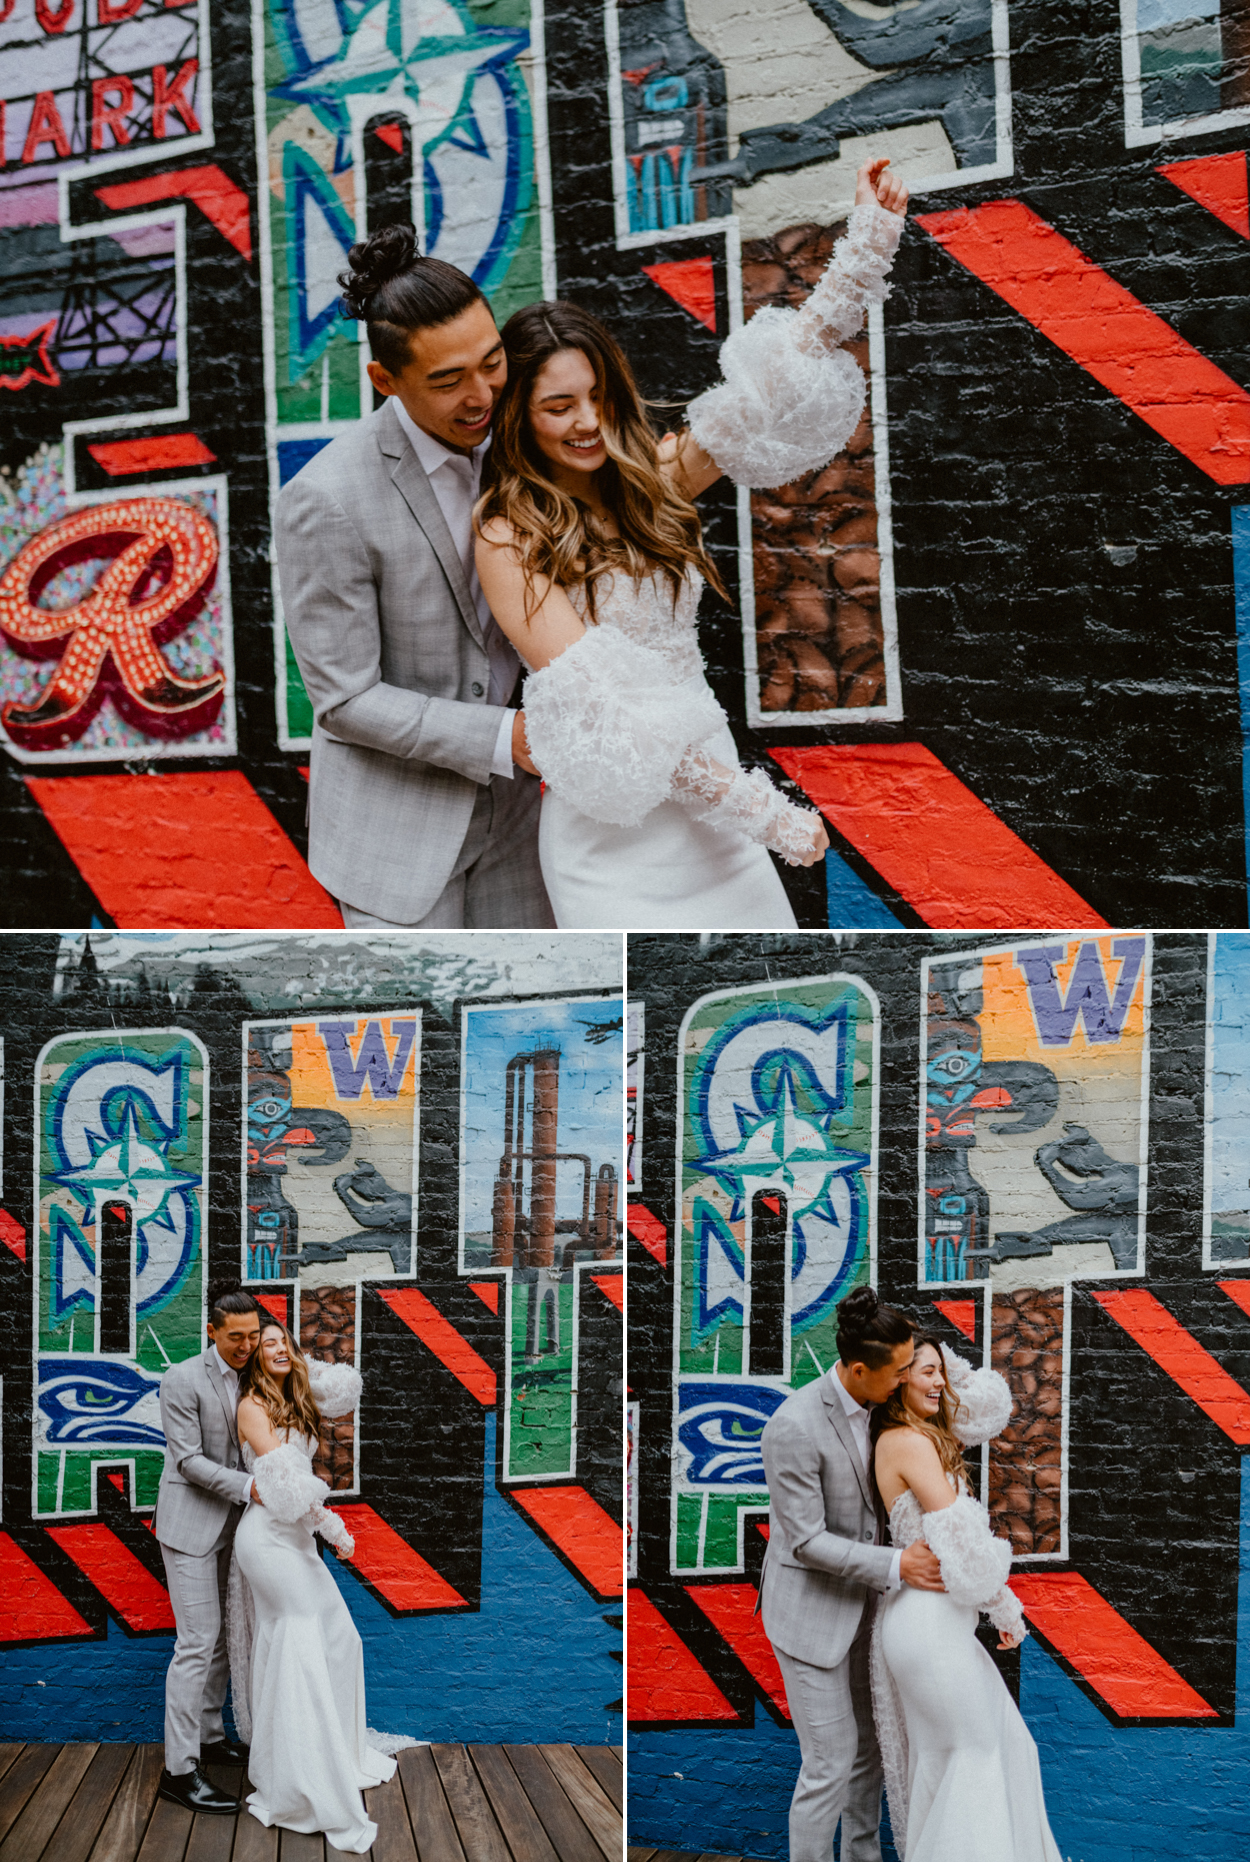 Bride and groom dancing in front of wall with graffiti